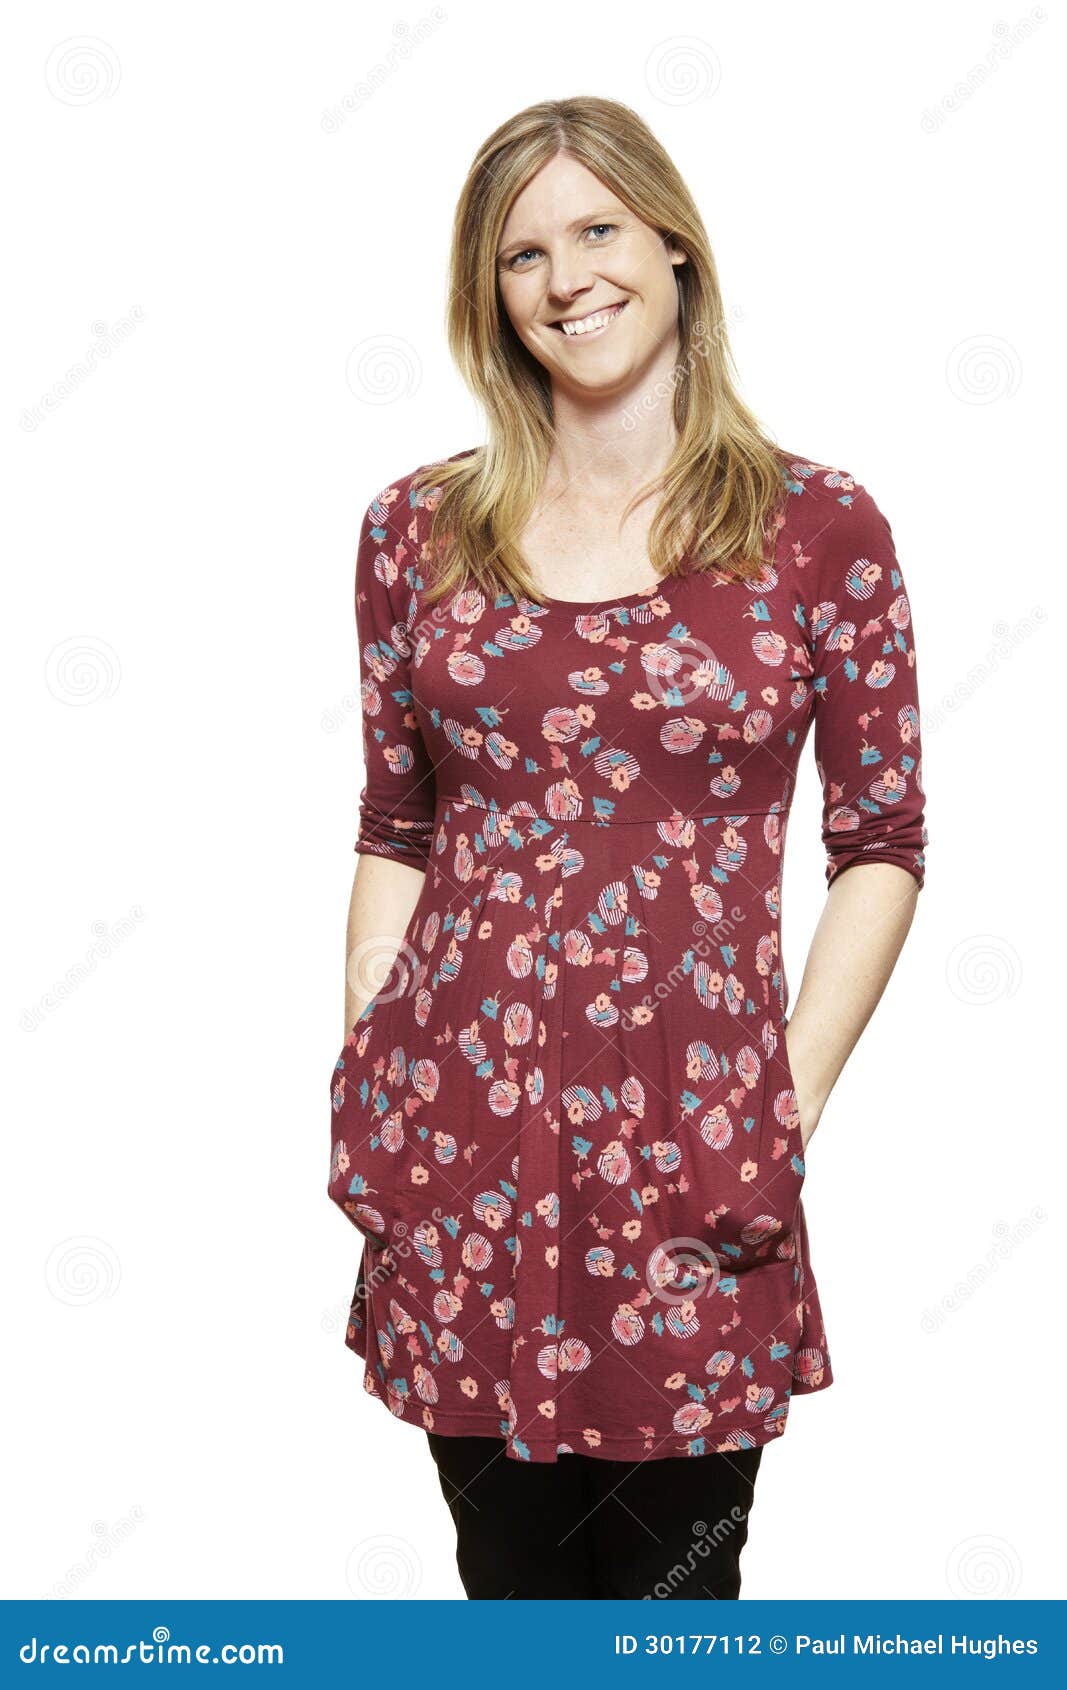 casually dressed young pregnant woman smiling